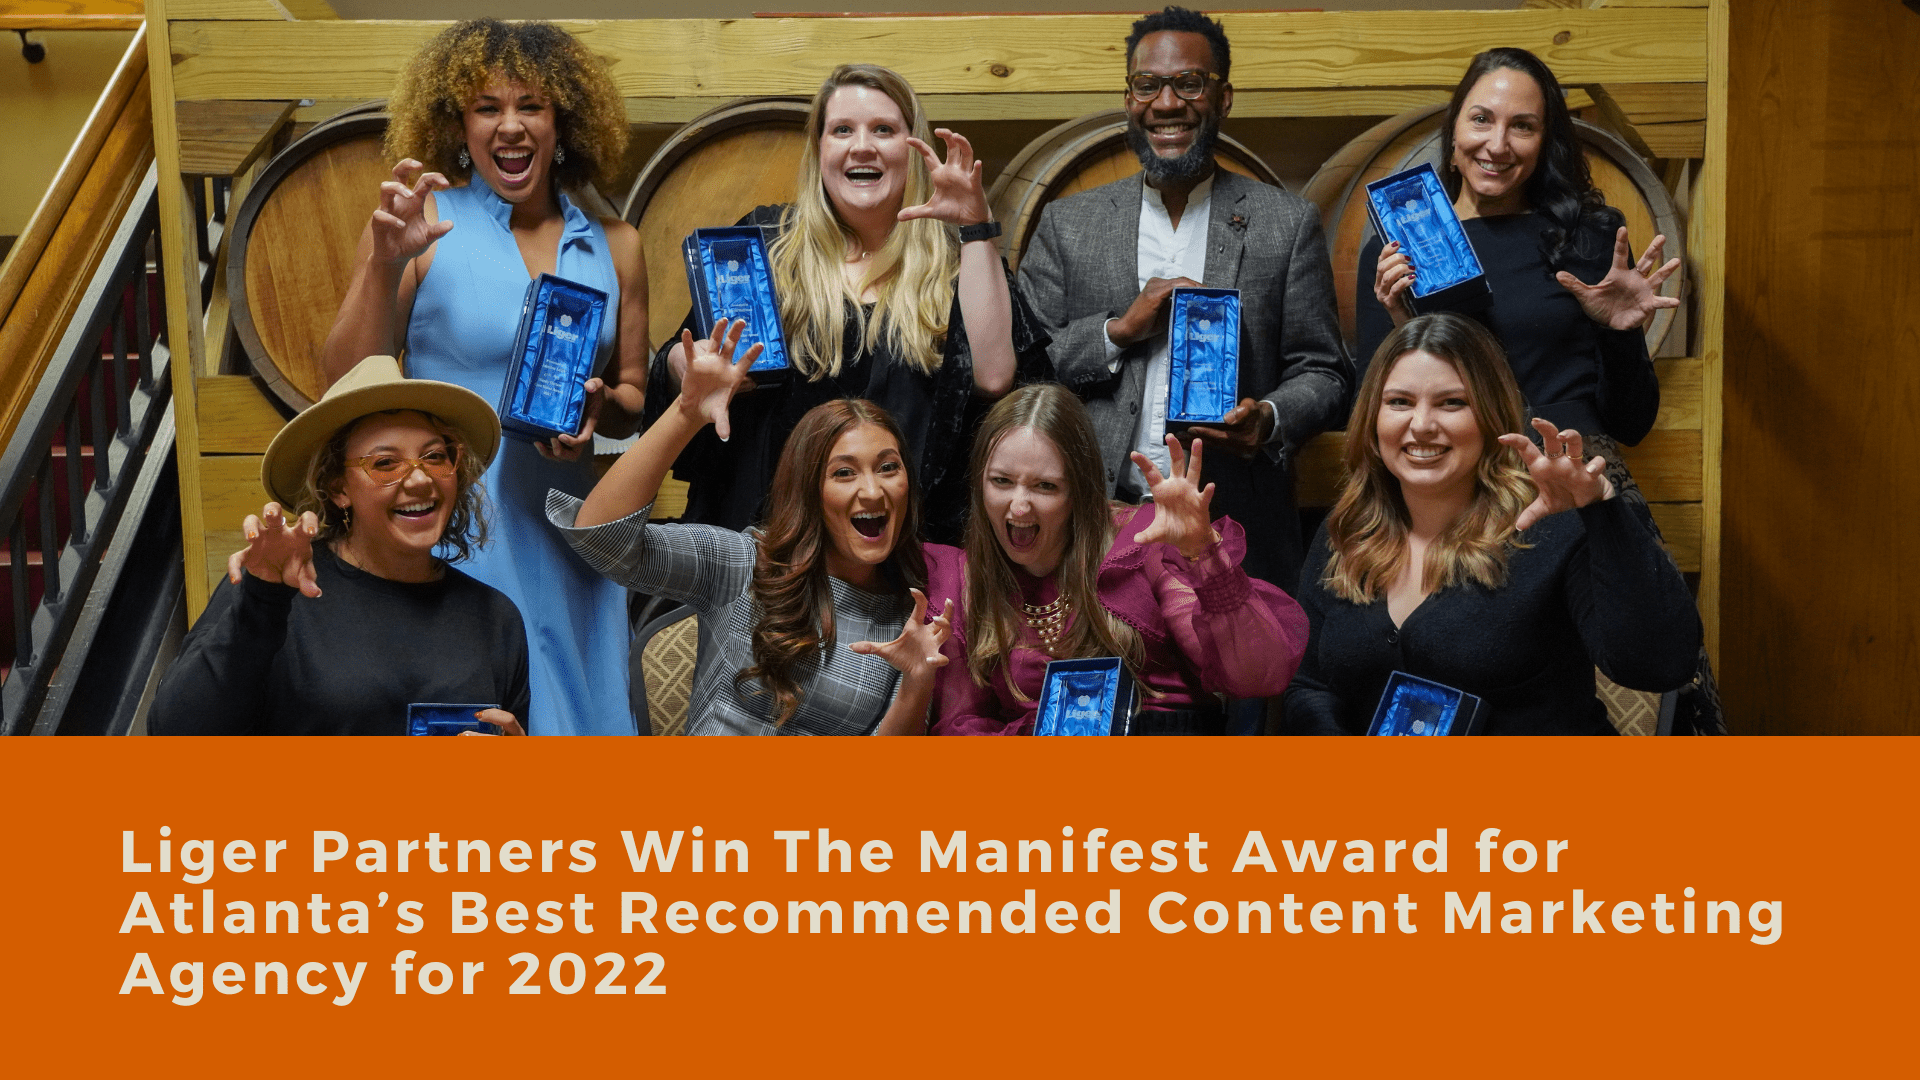 Liger Partners Win The Manifest Award for Atlanta’s Best Recommended Content Marketing Agency for 2022